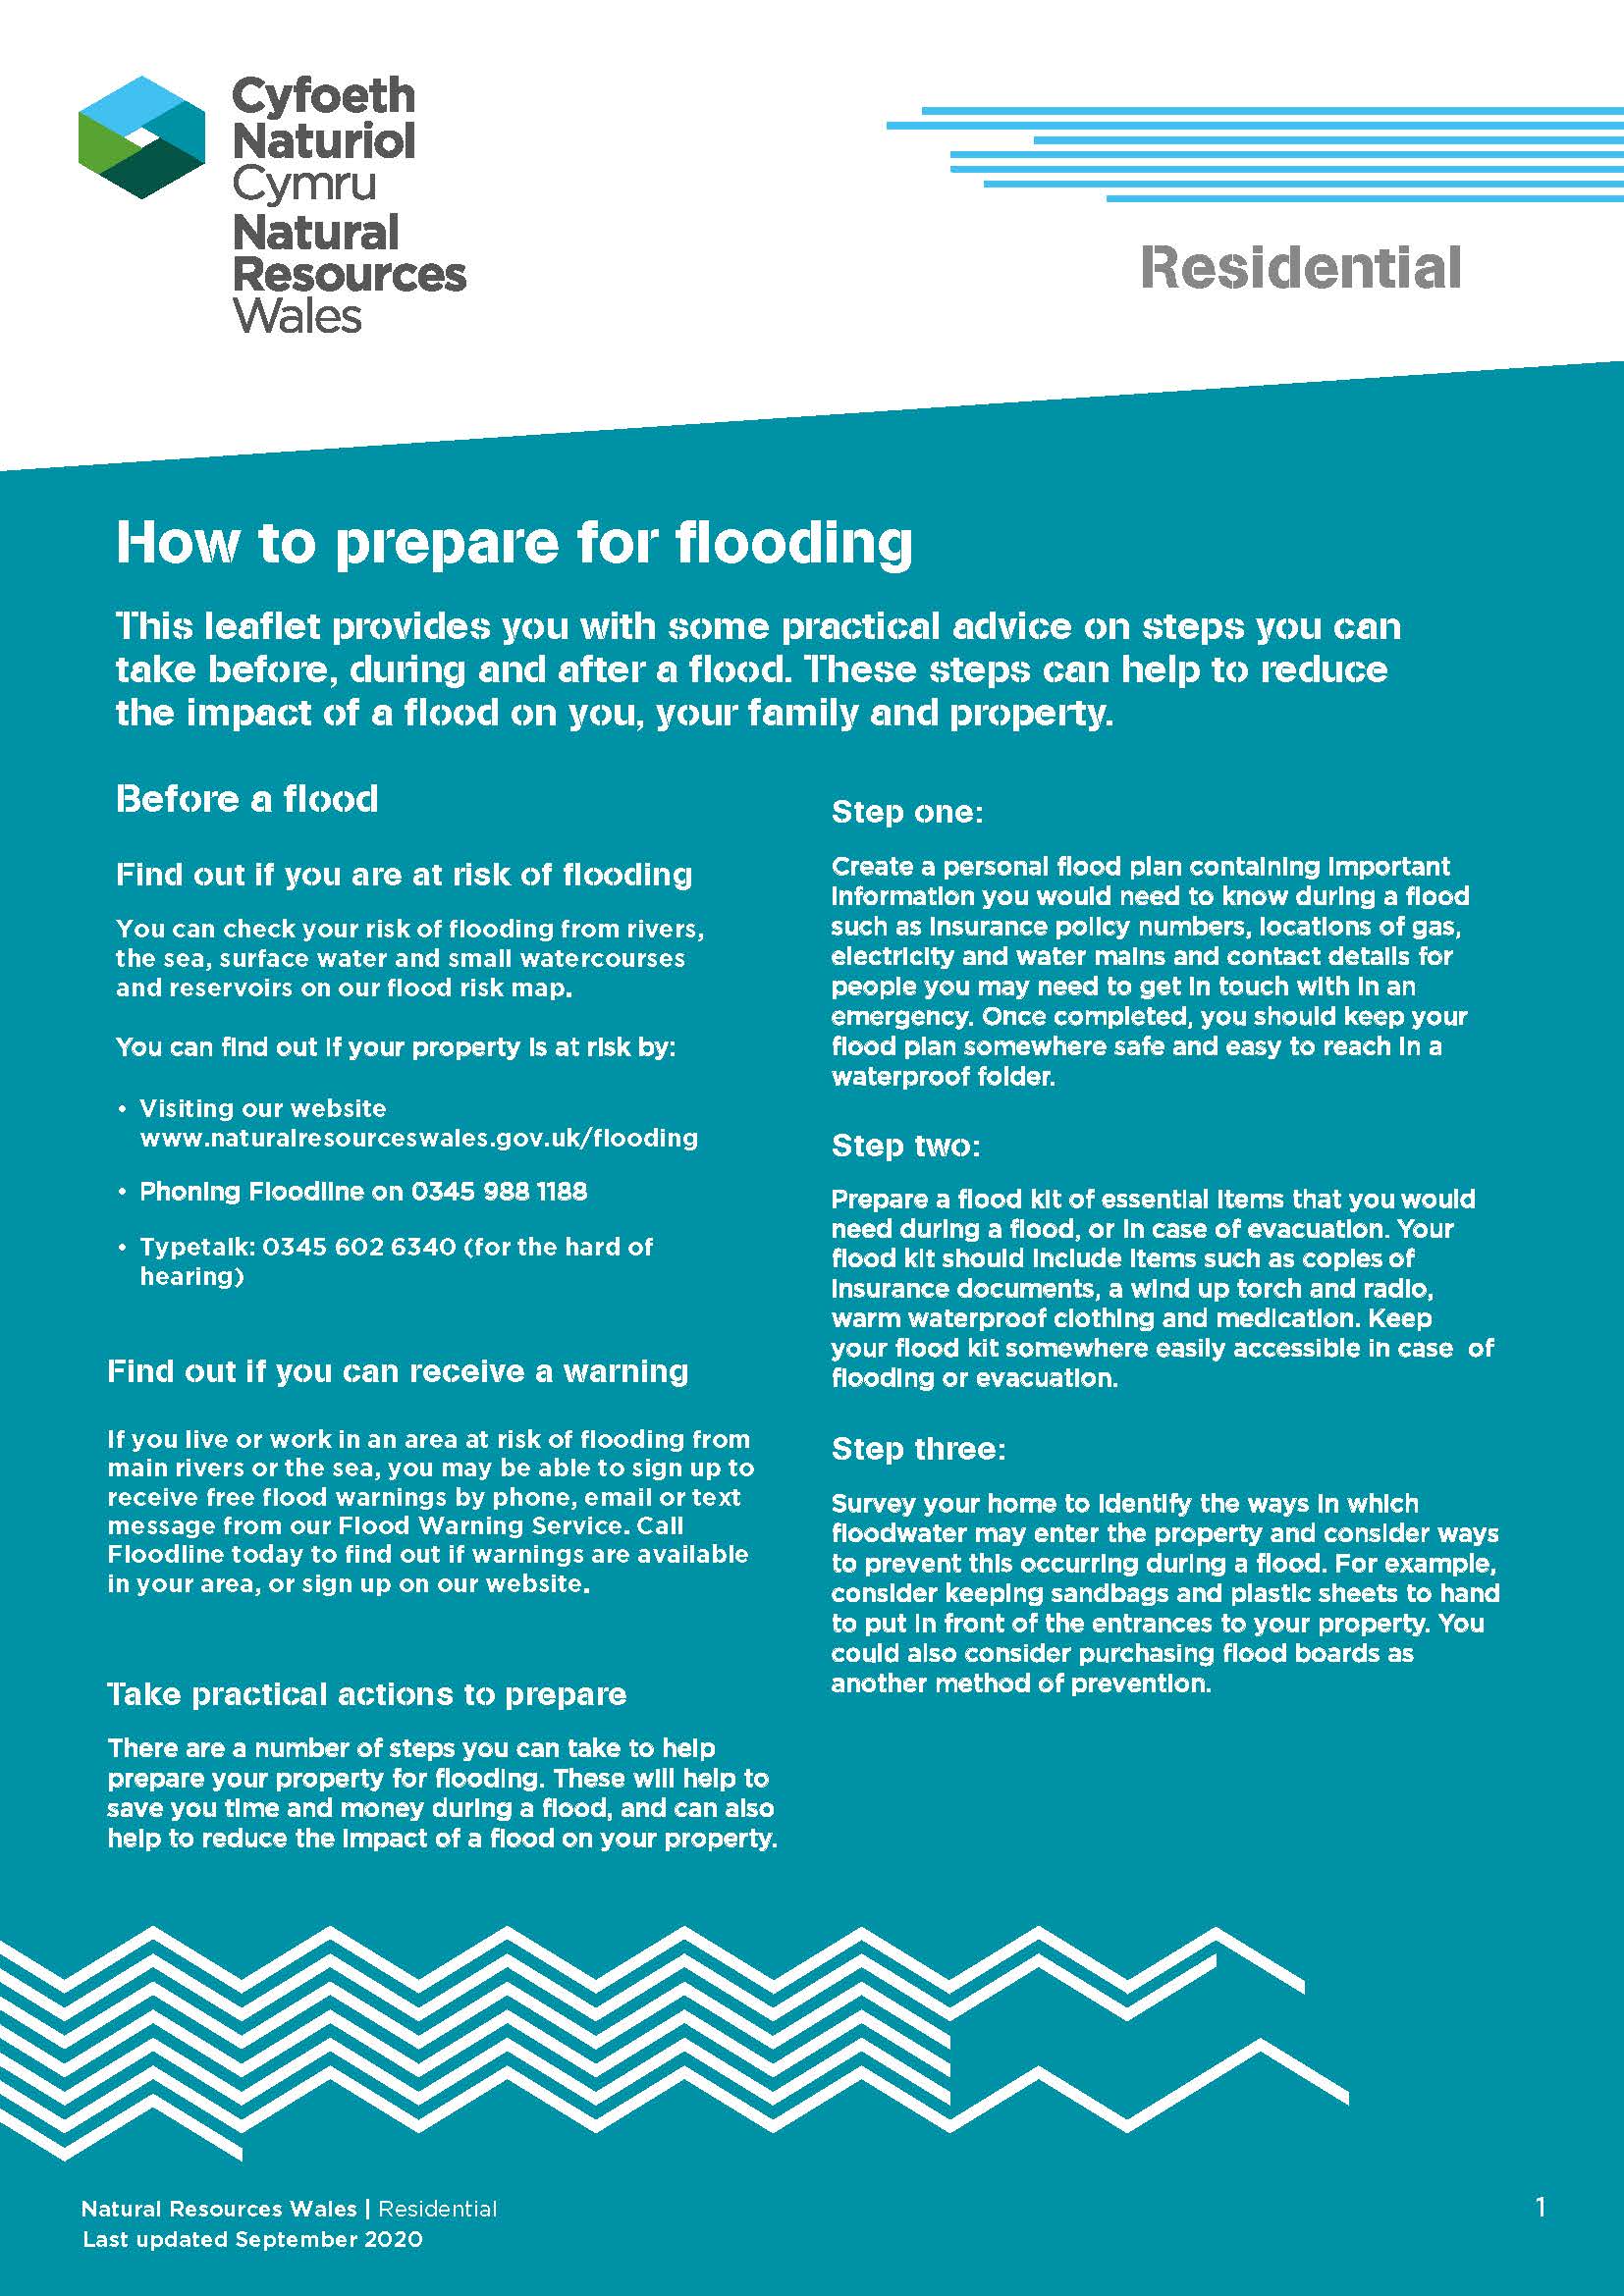 First page of 'How to prepare for flooding' leaflet